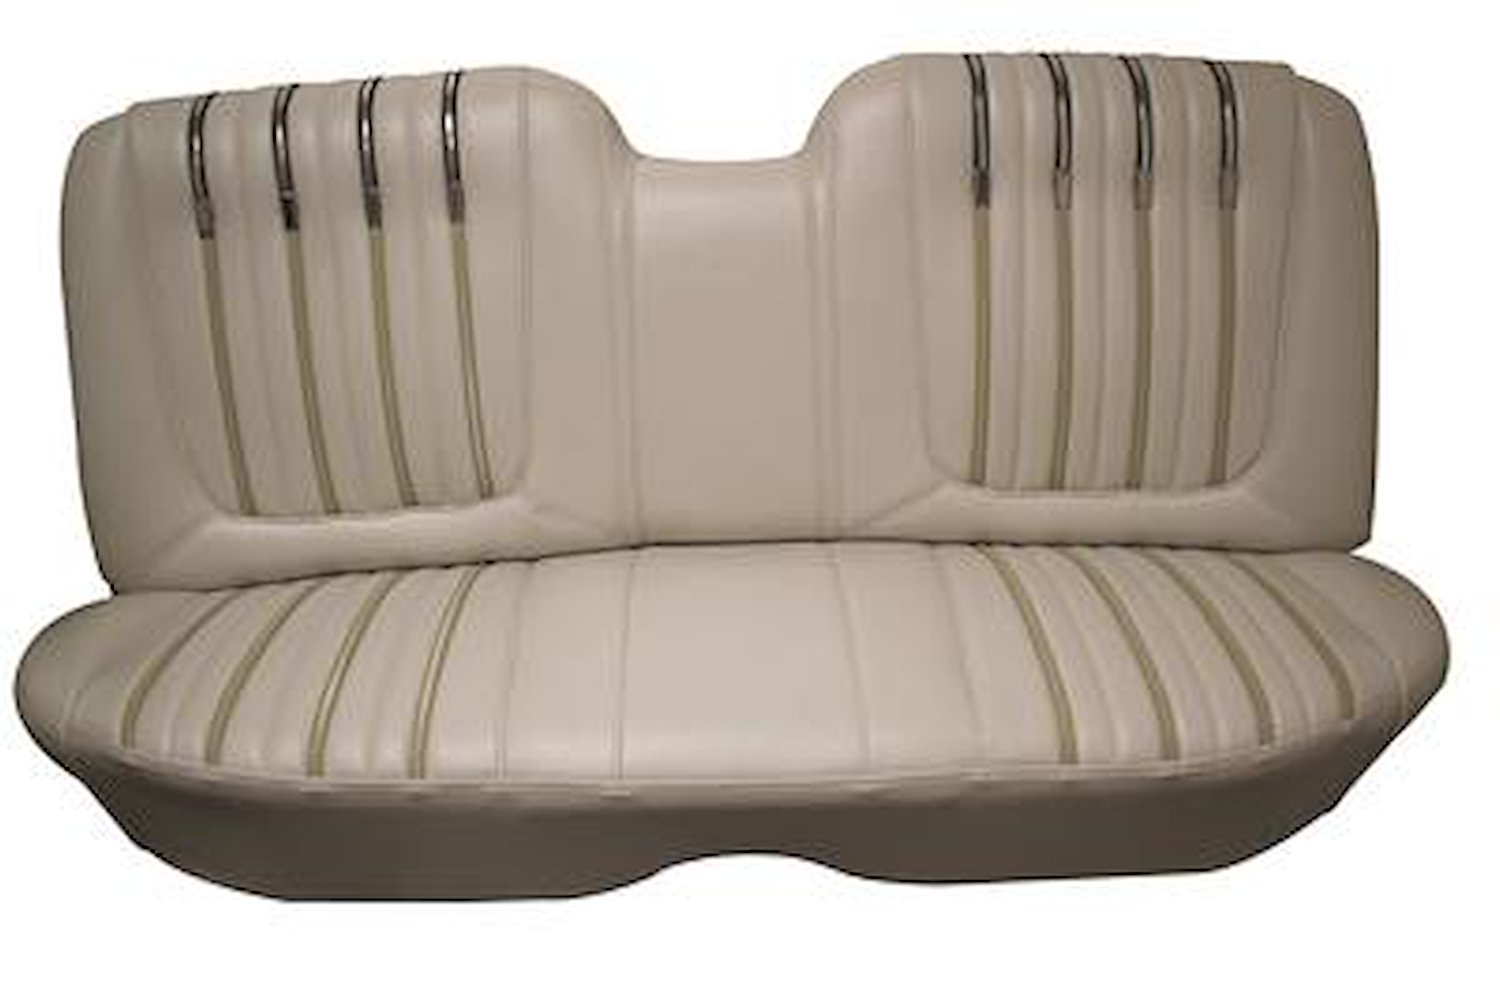 1962-1963 Ford Galaxie 500XL 2-Door Hardtop Interior Two-Tone Rear Bench Seat Upholstery Set